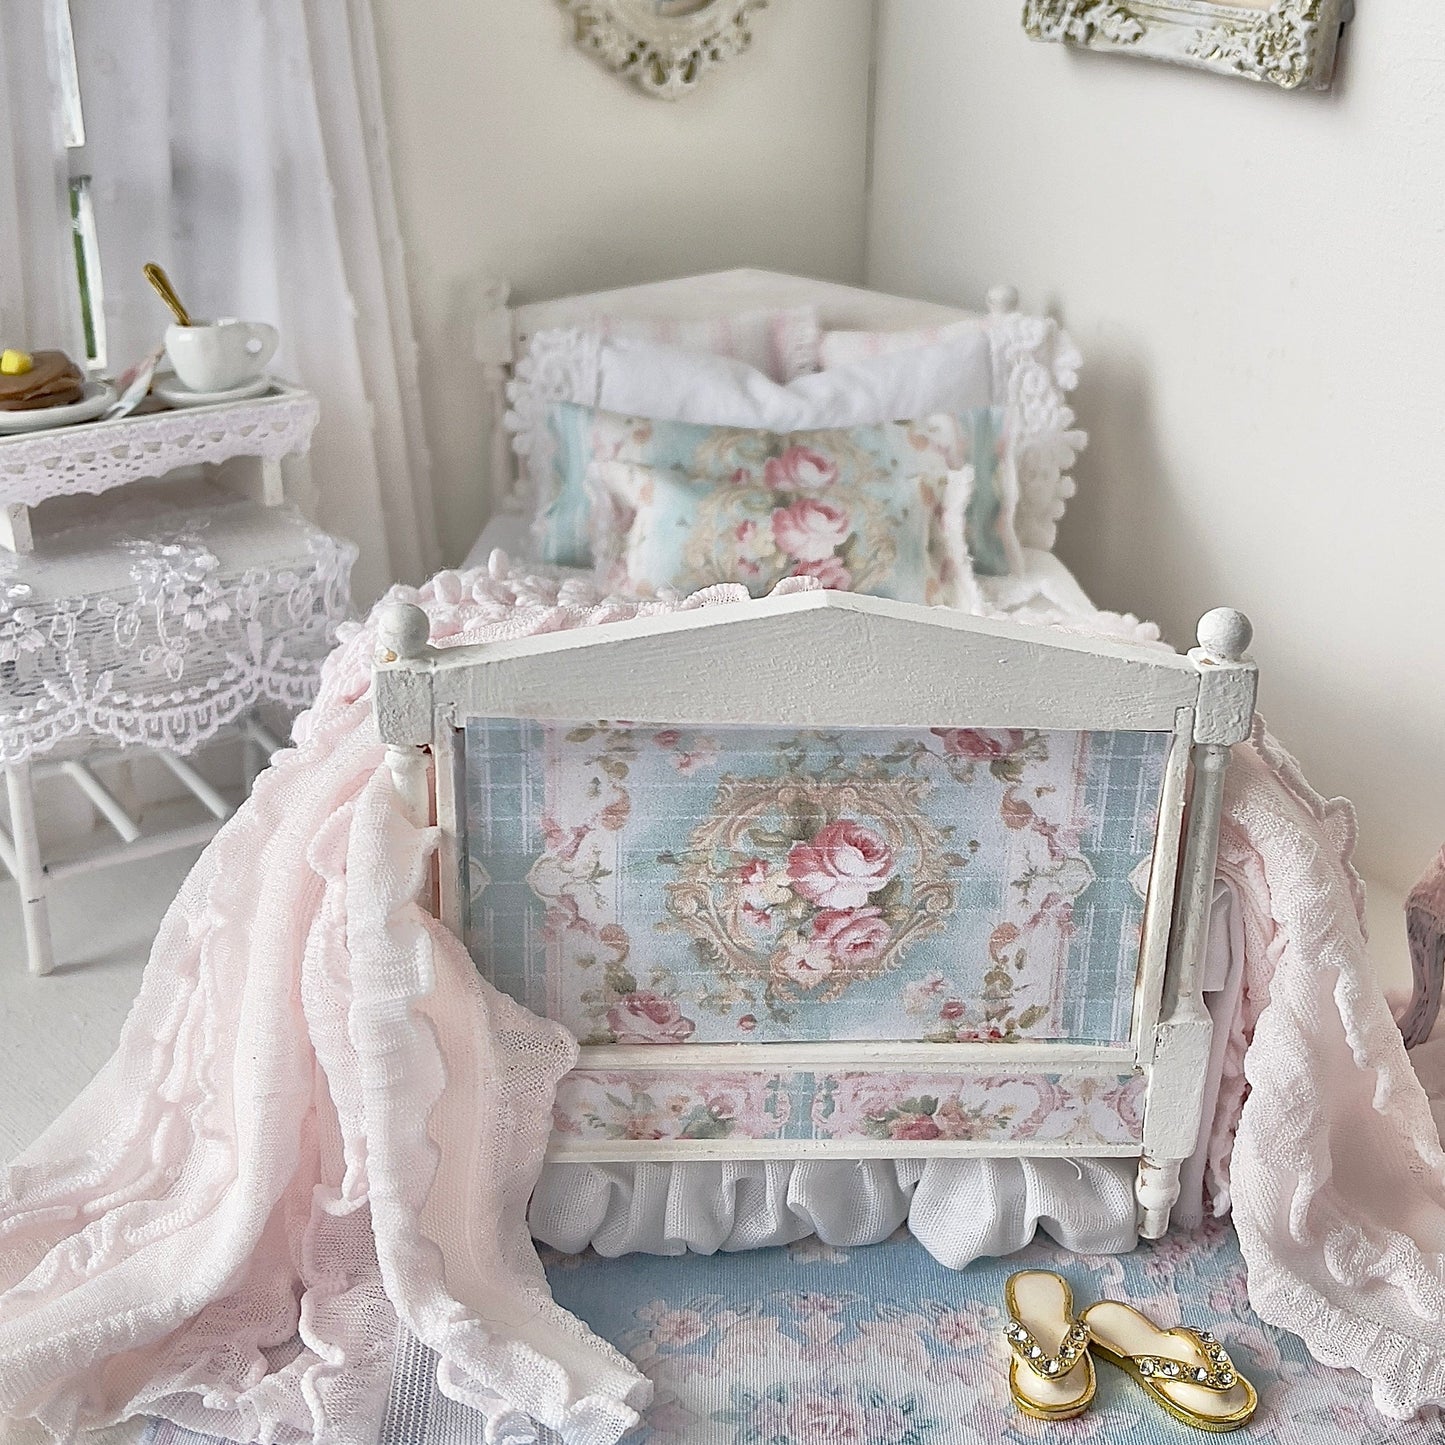 Chantallena Doll House (Copy) Dressed Bed | Sold White Cotton with Grand Pink Roses, Lace Accents, Ruffled Knit Throw